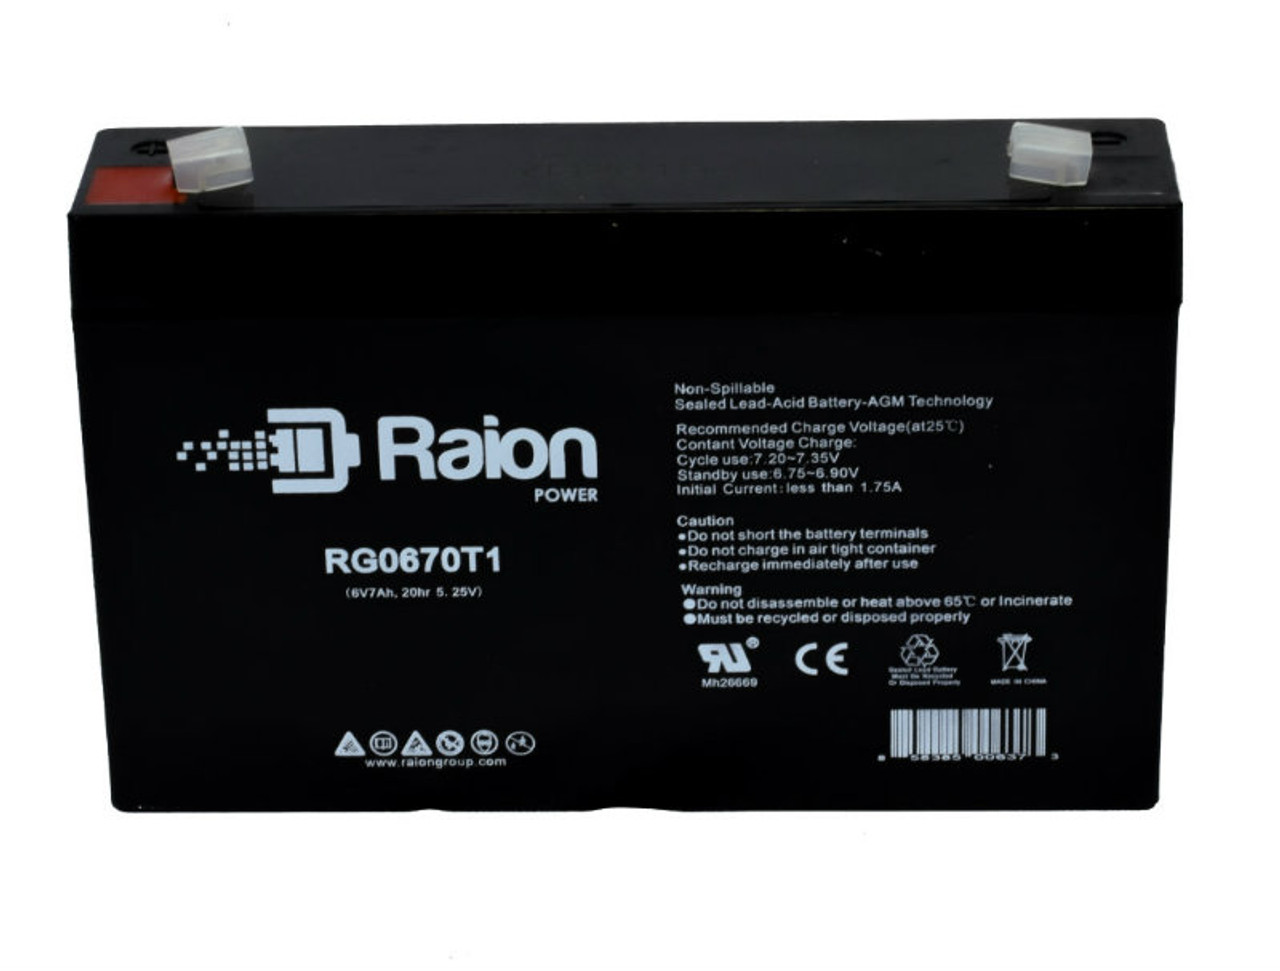 Raion Power RG0670T1 Replacement Battery Cartridge for Light Alarms PL3